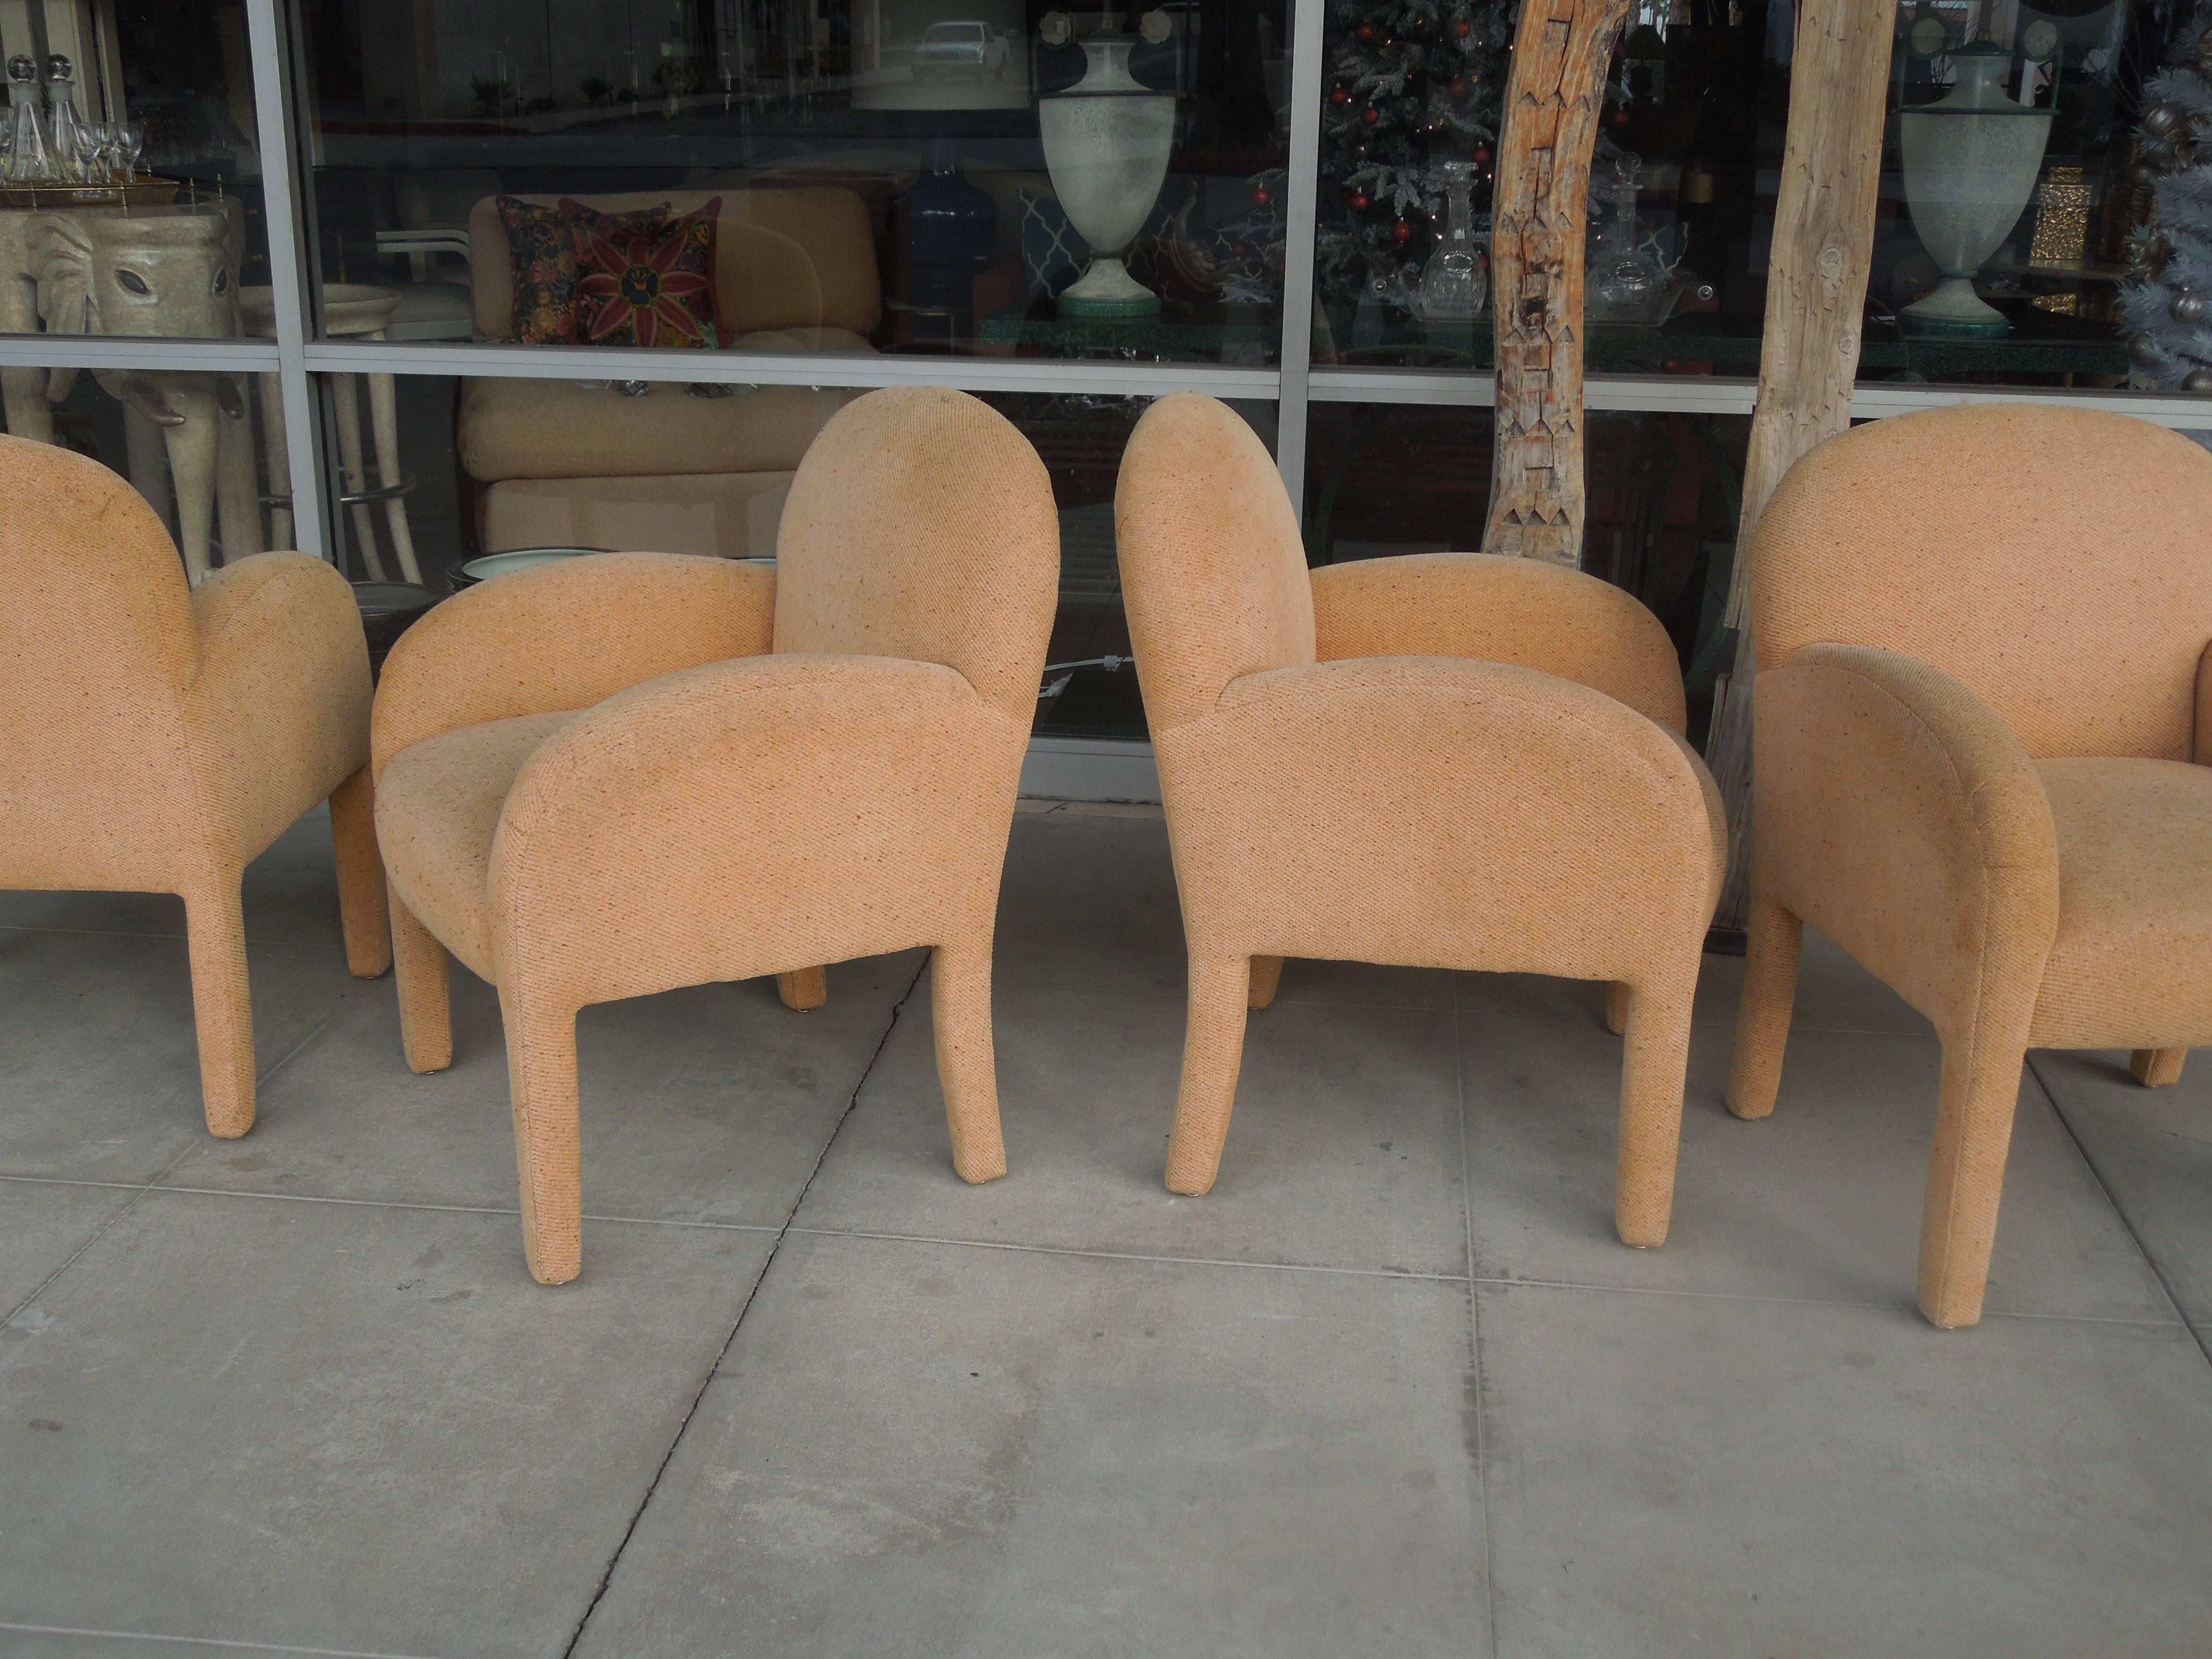 This set of four handmade in Los Angeles in the early 1980s, A. Rudin chairs were designed by Steve Chase for a upscale Rancho Mirage Estate, The chairs are in a beautiful neutral high end chennile, with one small flaw on the back of one chair,